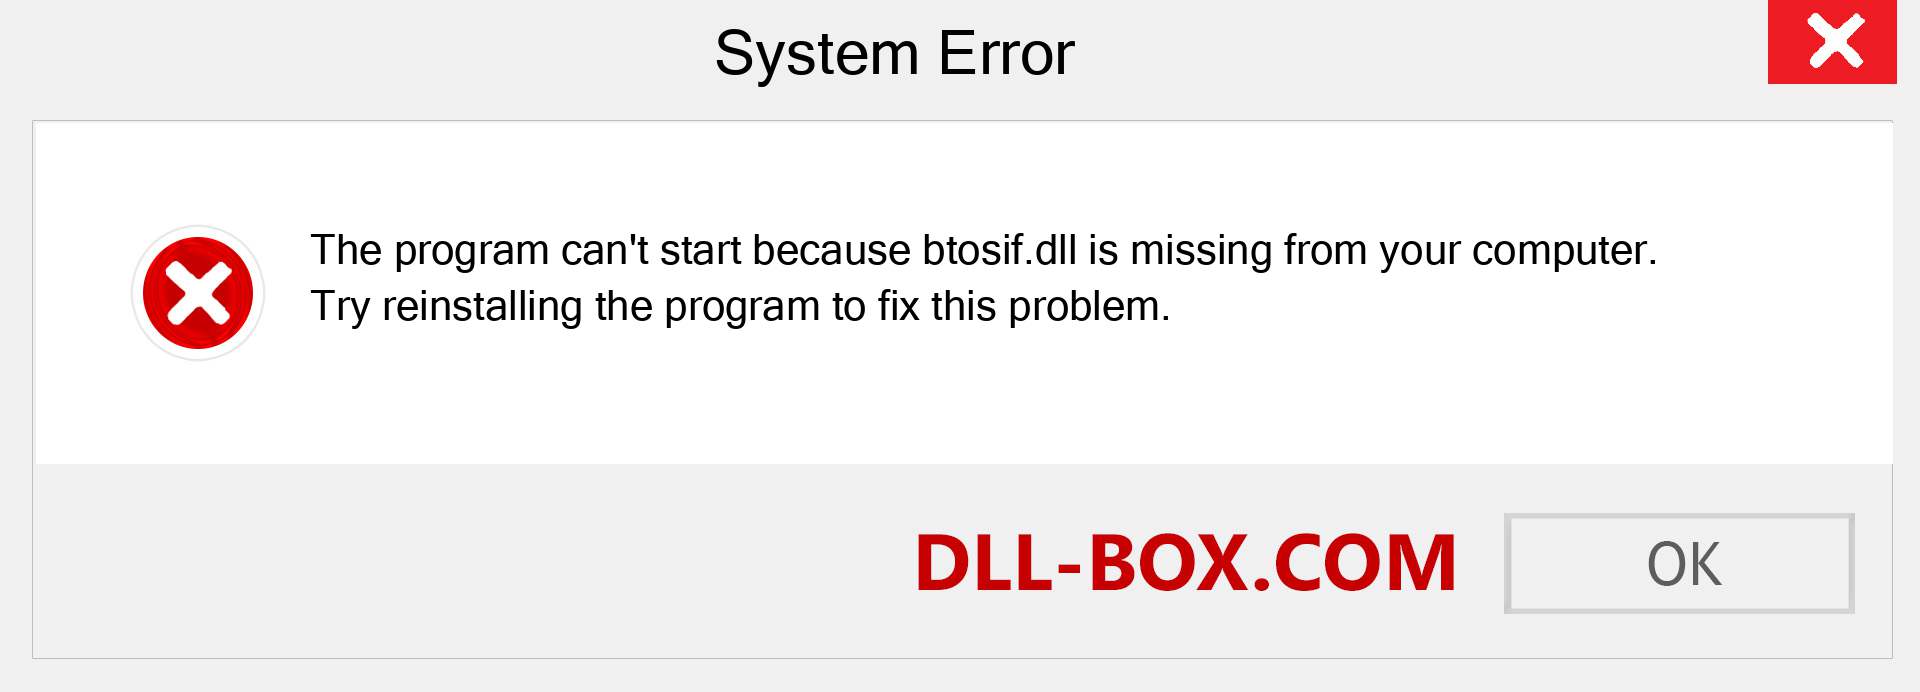  btosif.dll file is missing?. Download for Windows 7, 8, 10 - Fix  btosif dll Missing Error on Windows, photos, images